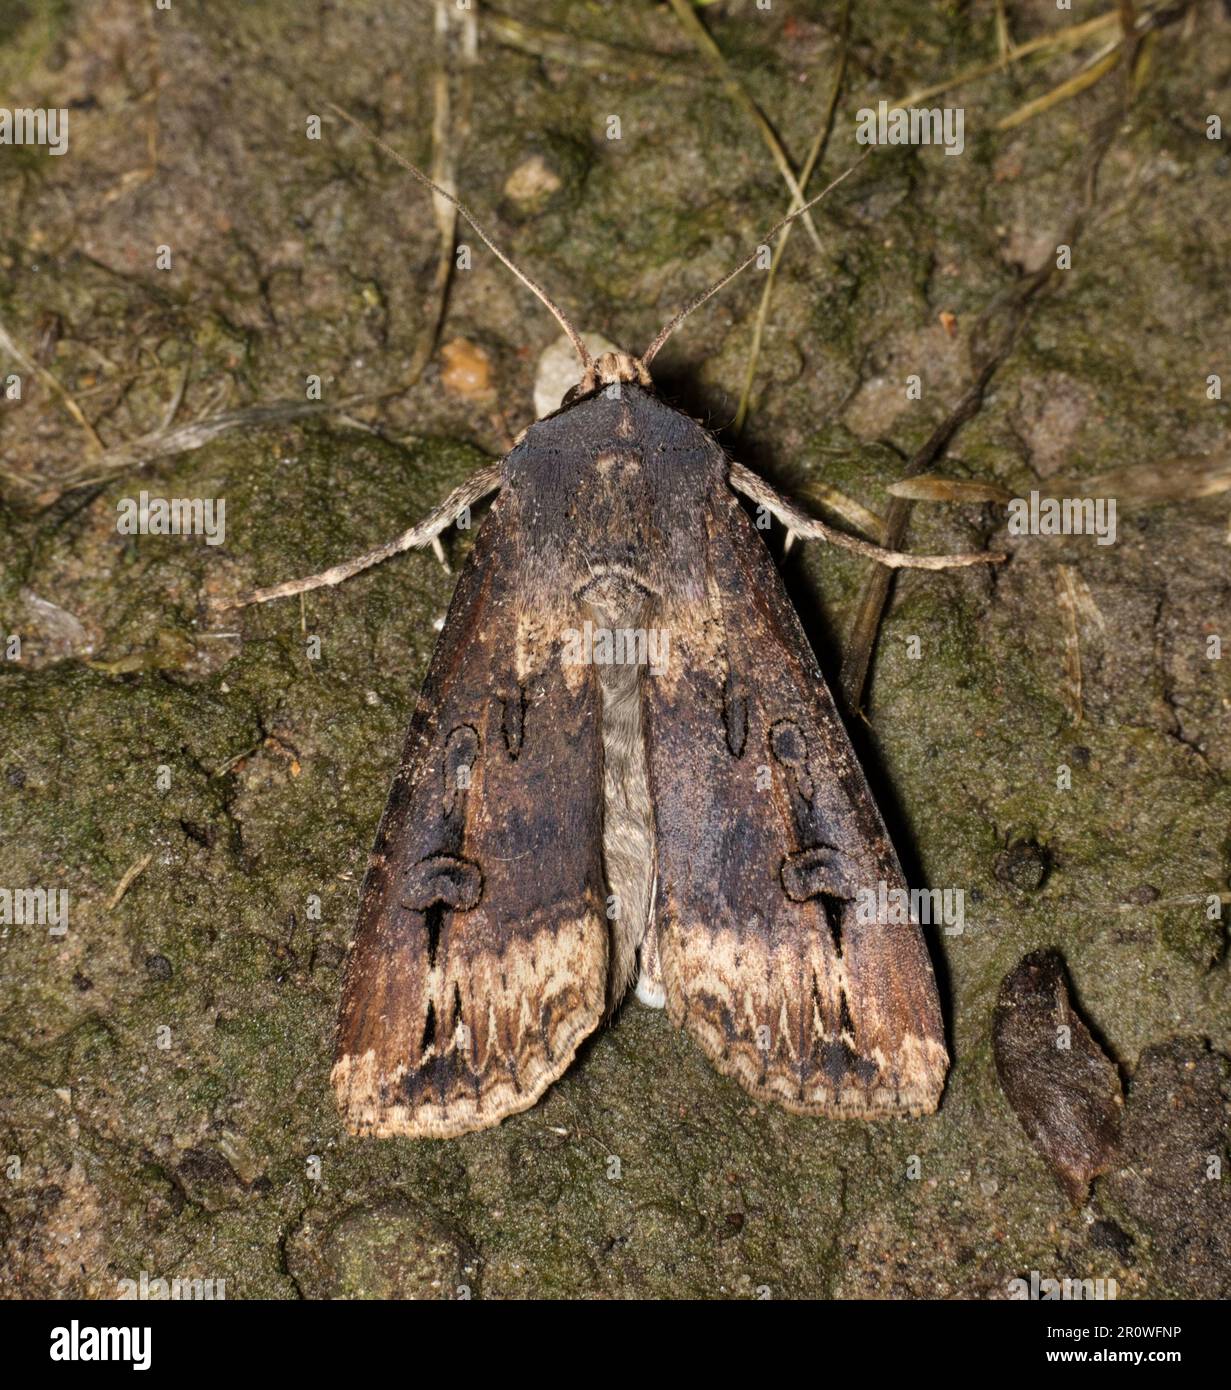 Black Cutworm Moth (Agrotis ipsilon) roosting on the ground, dorsal view. Destructive pest species to the agriculture industry worldwide. Stock Photo